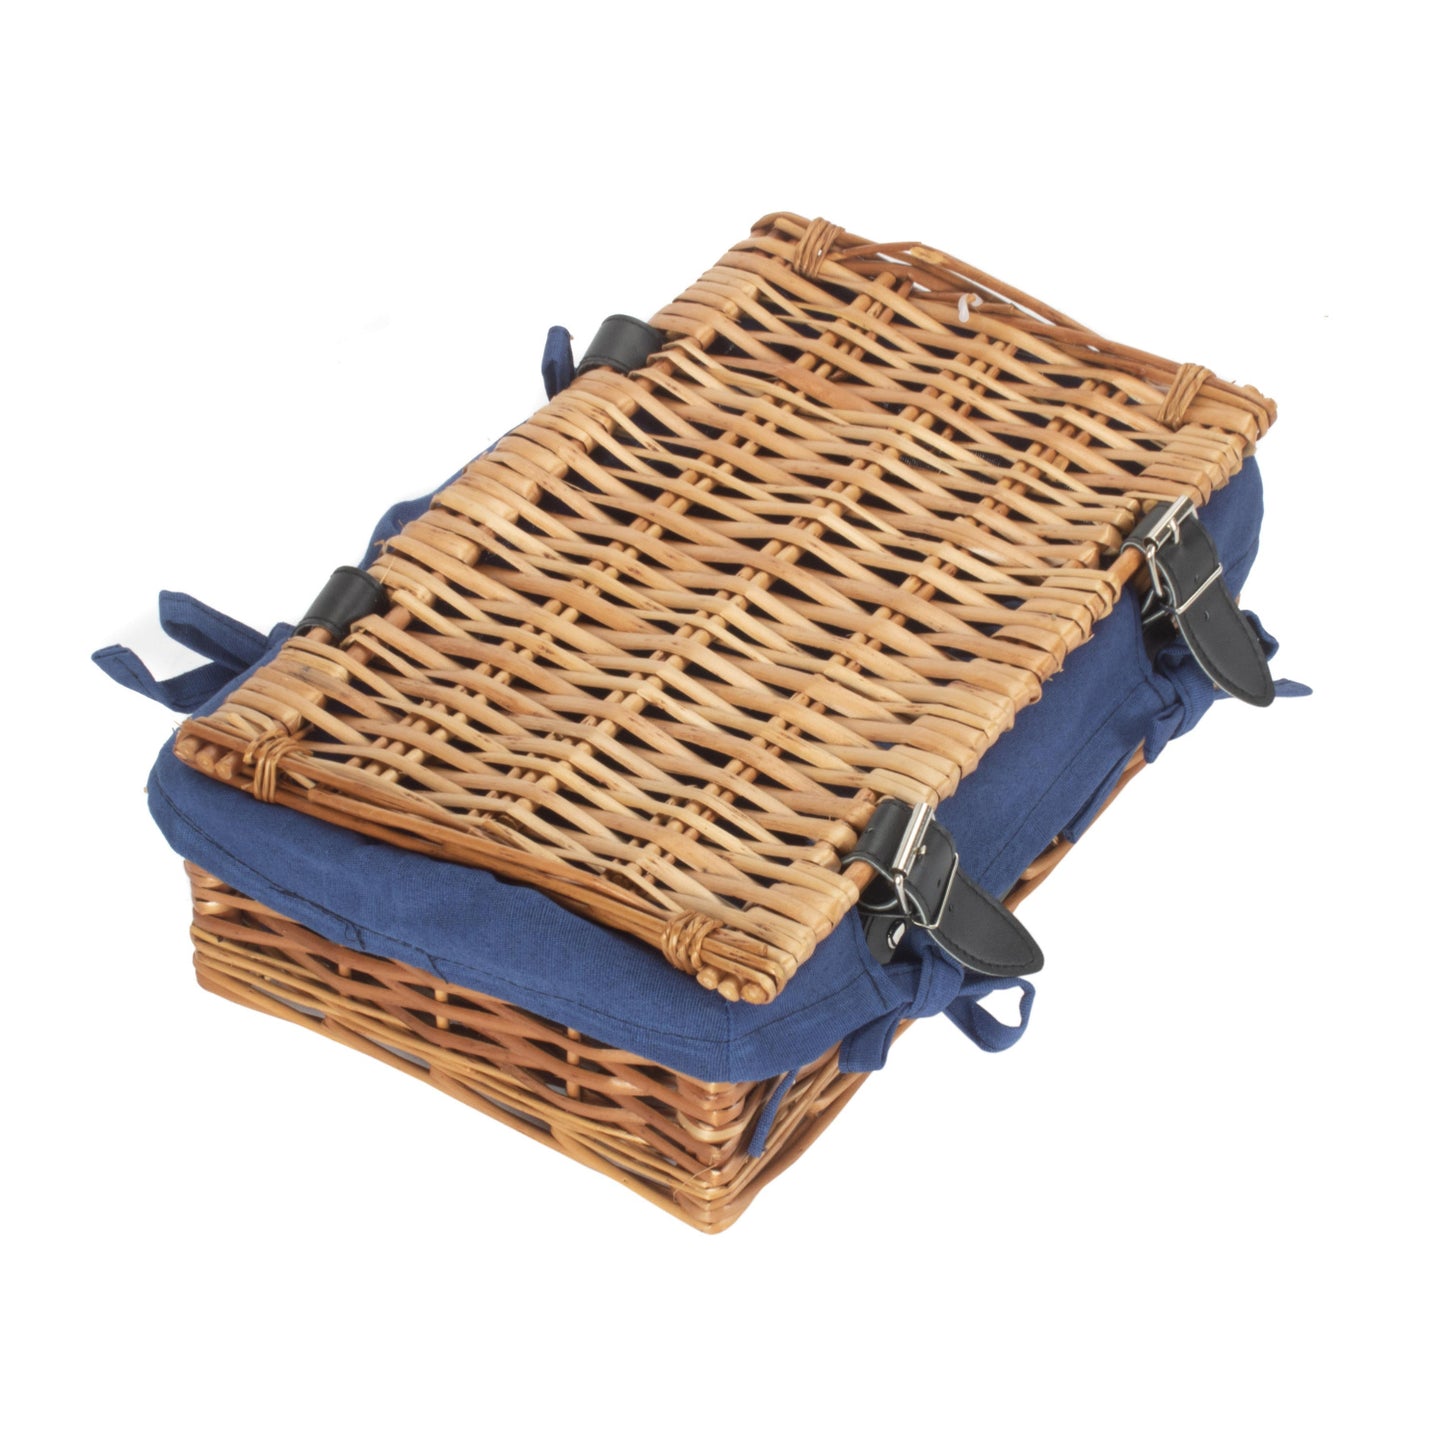 14 Inch Small Packaging Hamper With Navy Blue Lining